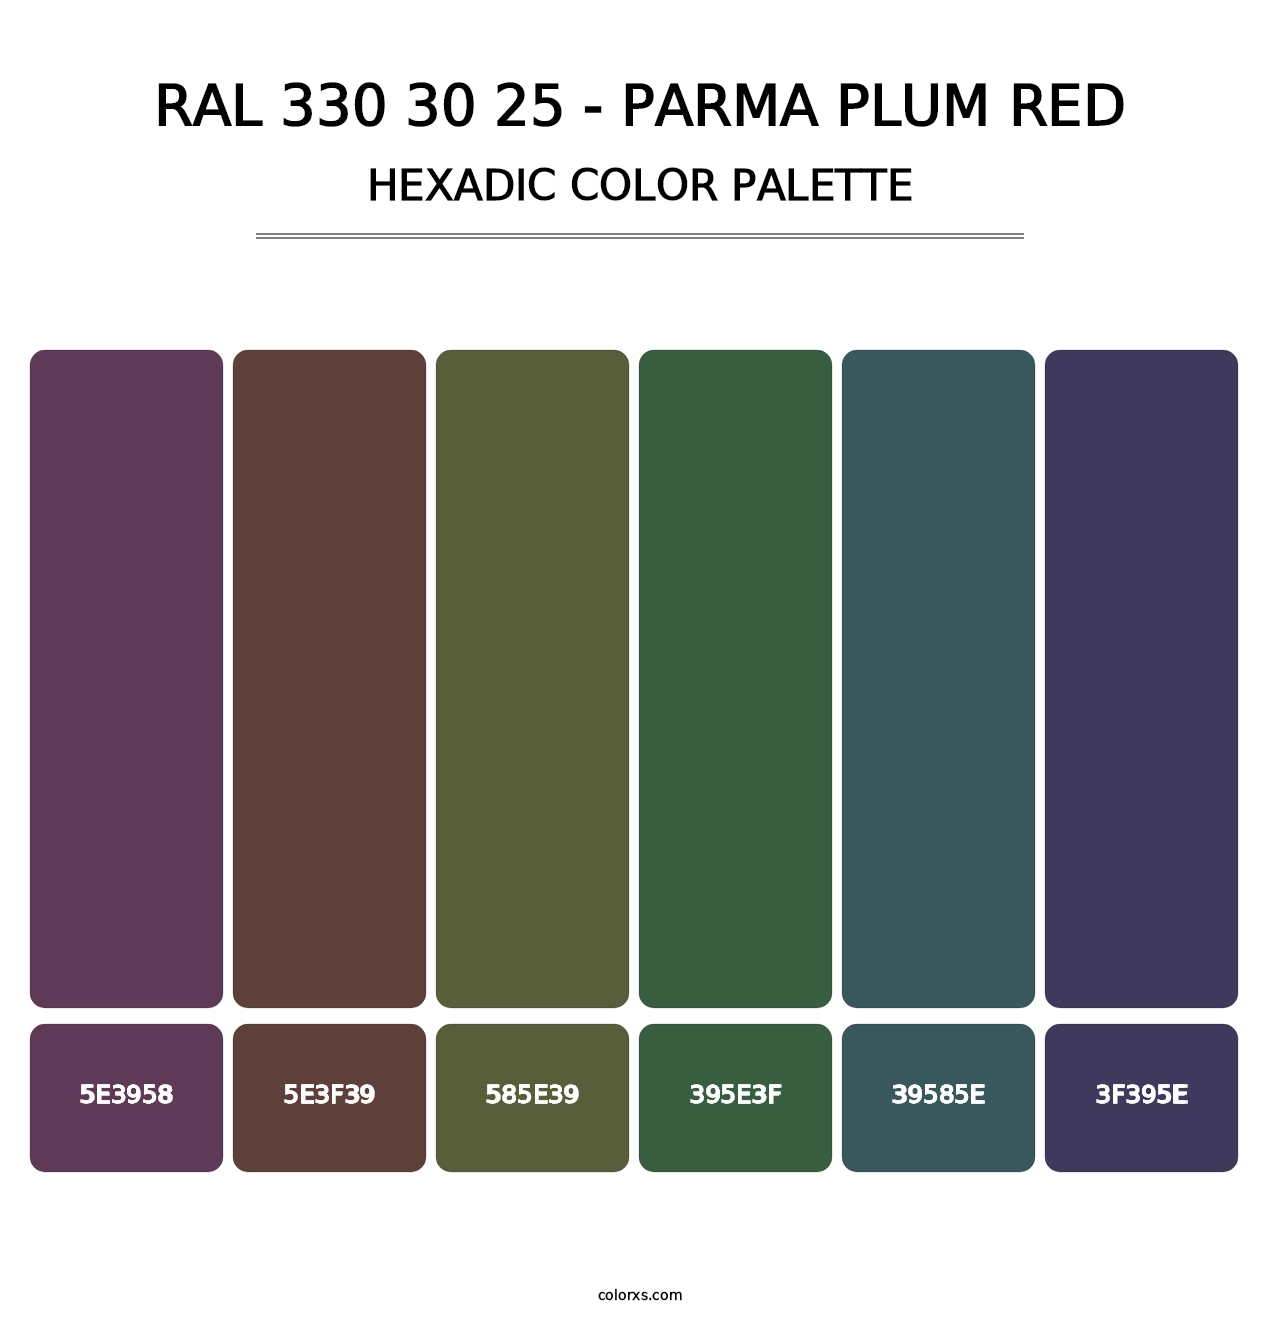 RAL 330 30 25 - Parma Plum Red - Hexadic Color Palette